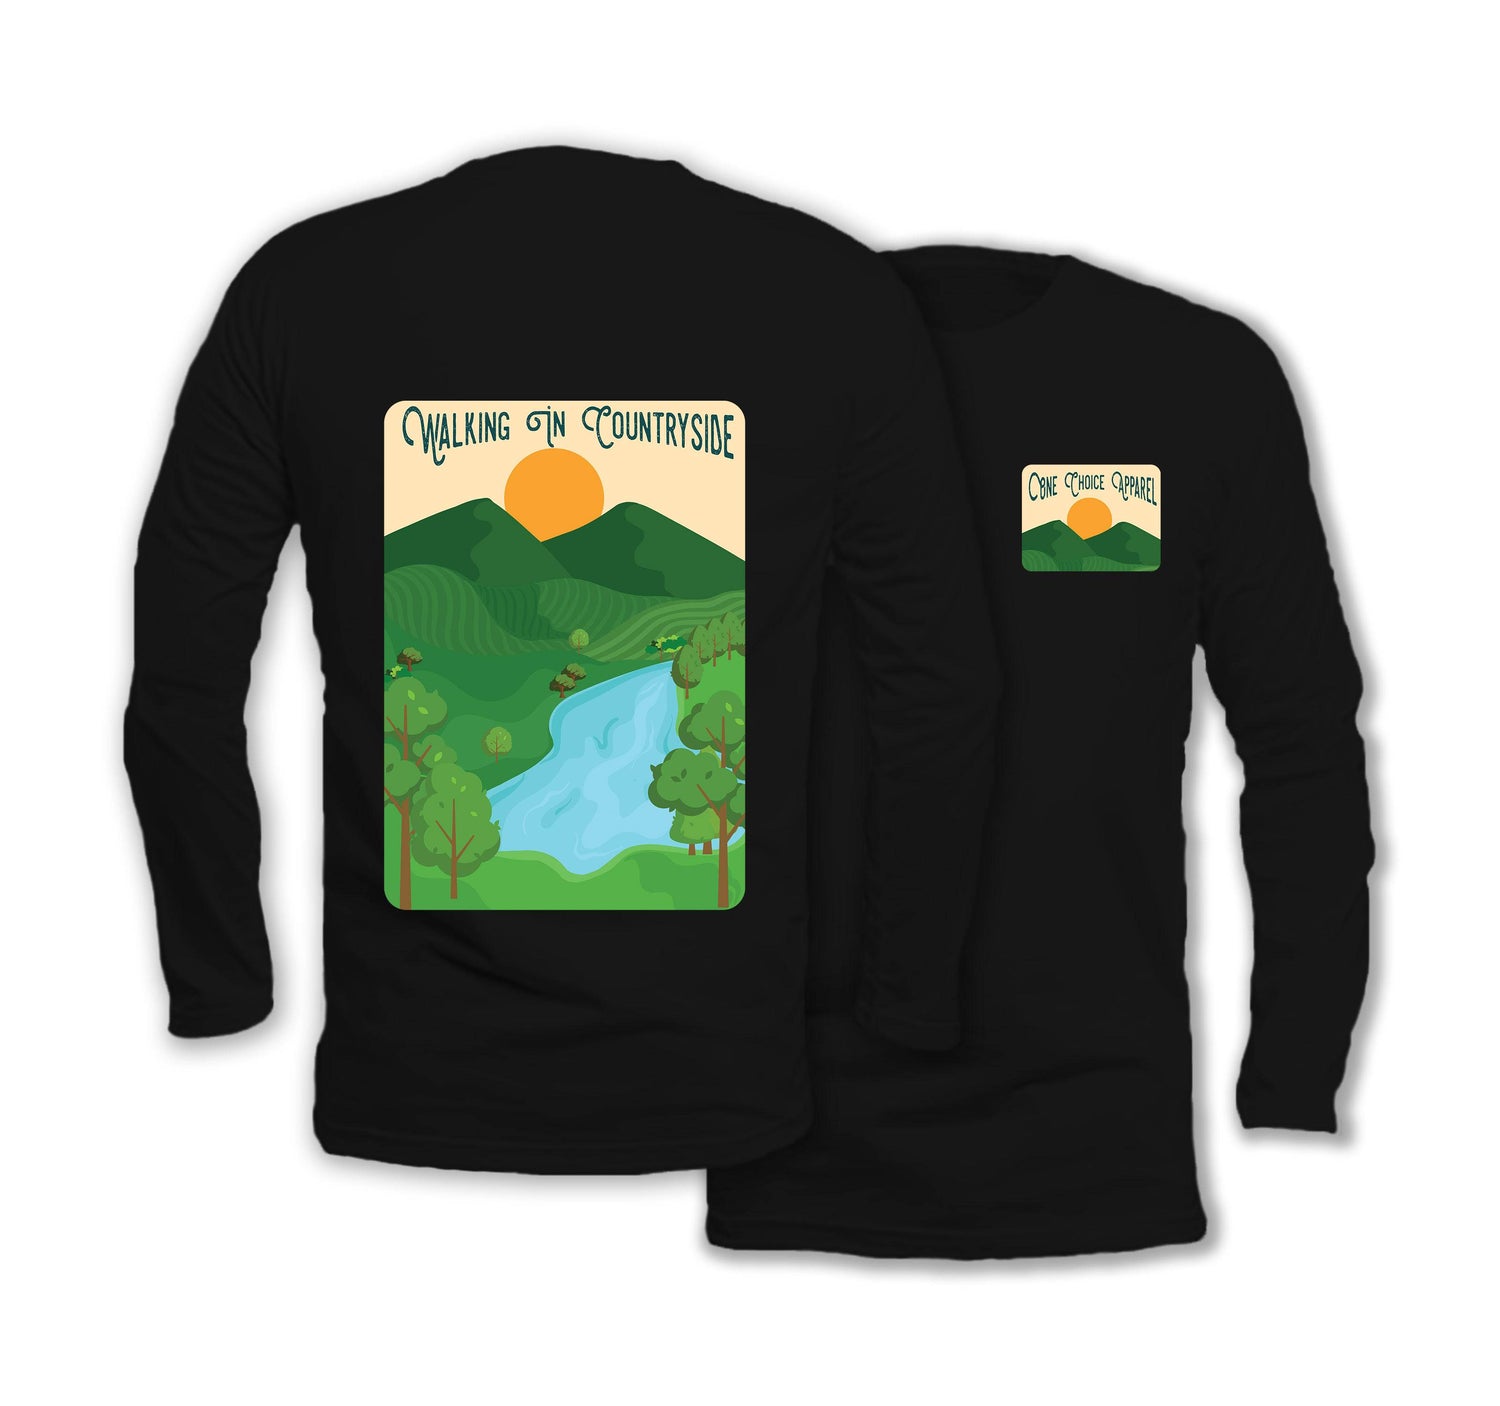 Walking In Countryside - Long Sleeve Organic Cotton T-Shirt - One Choice Apparel